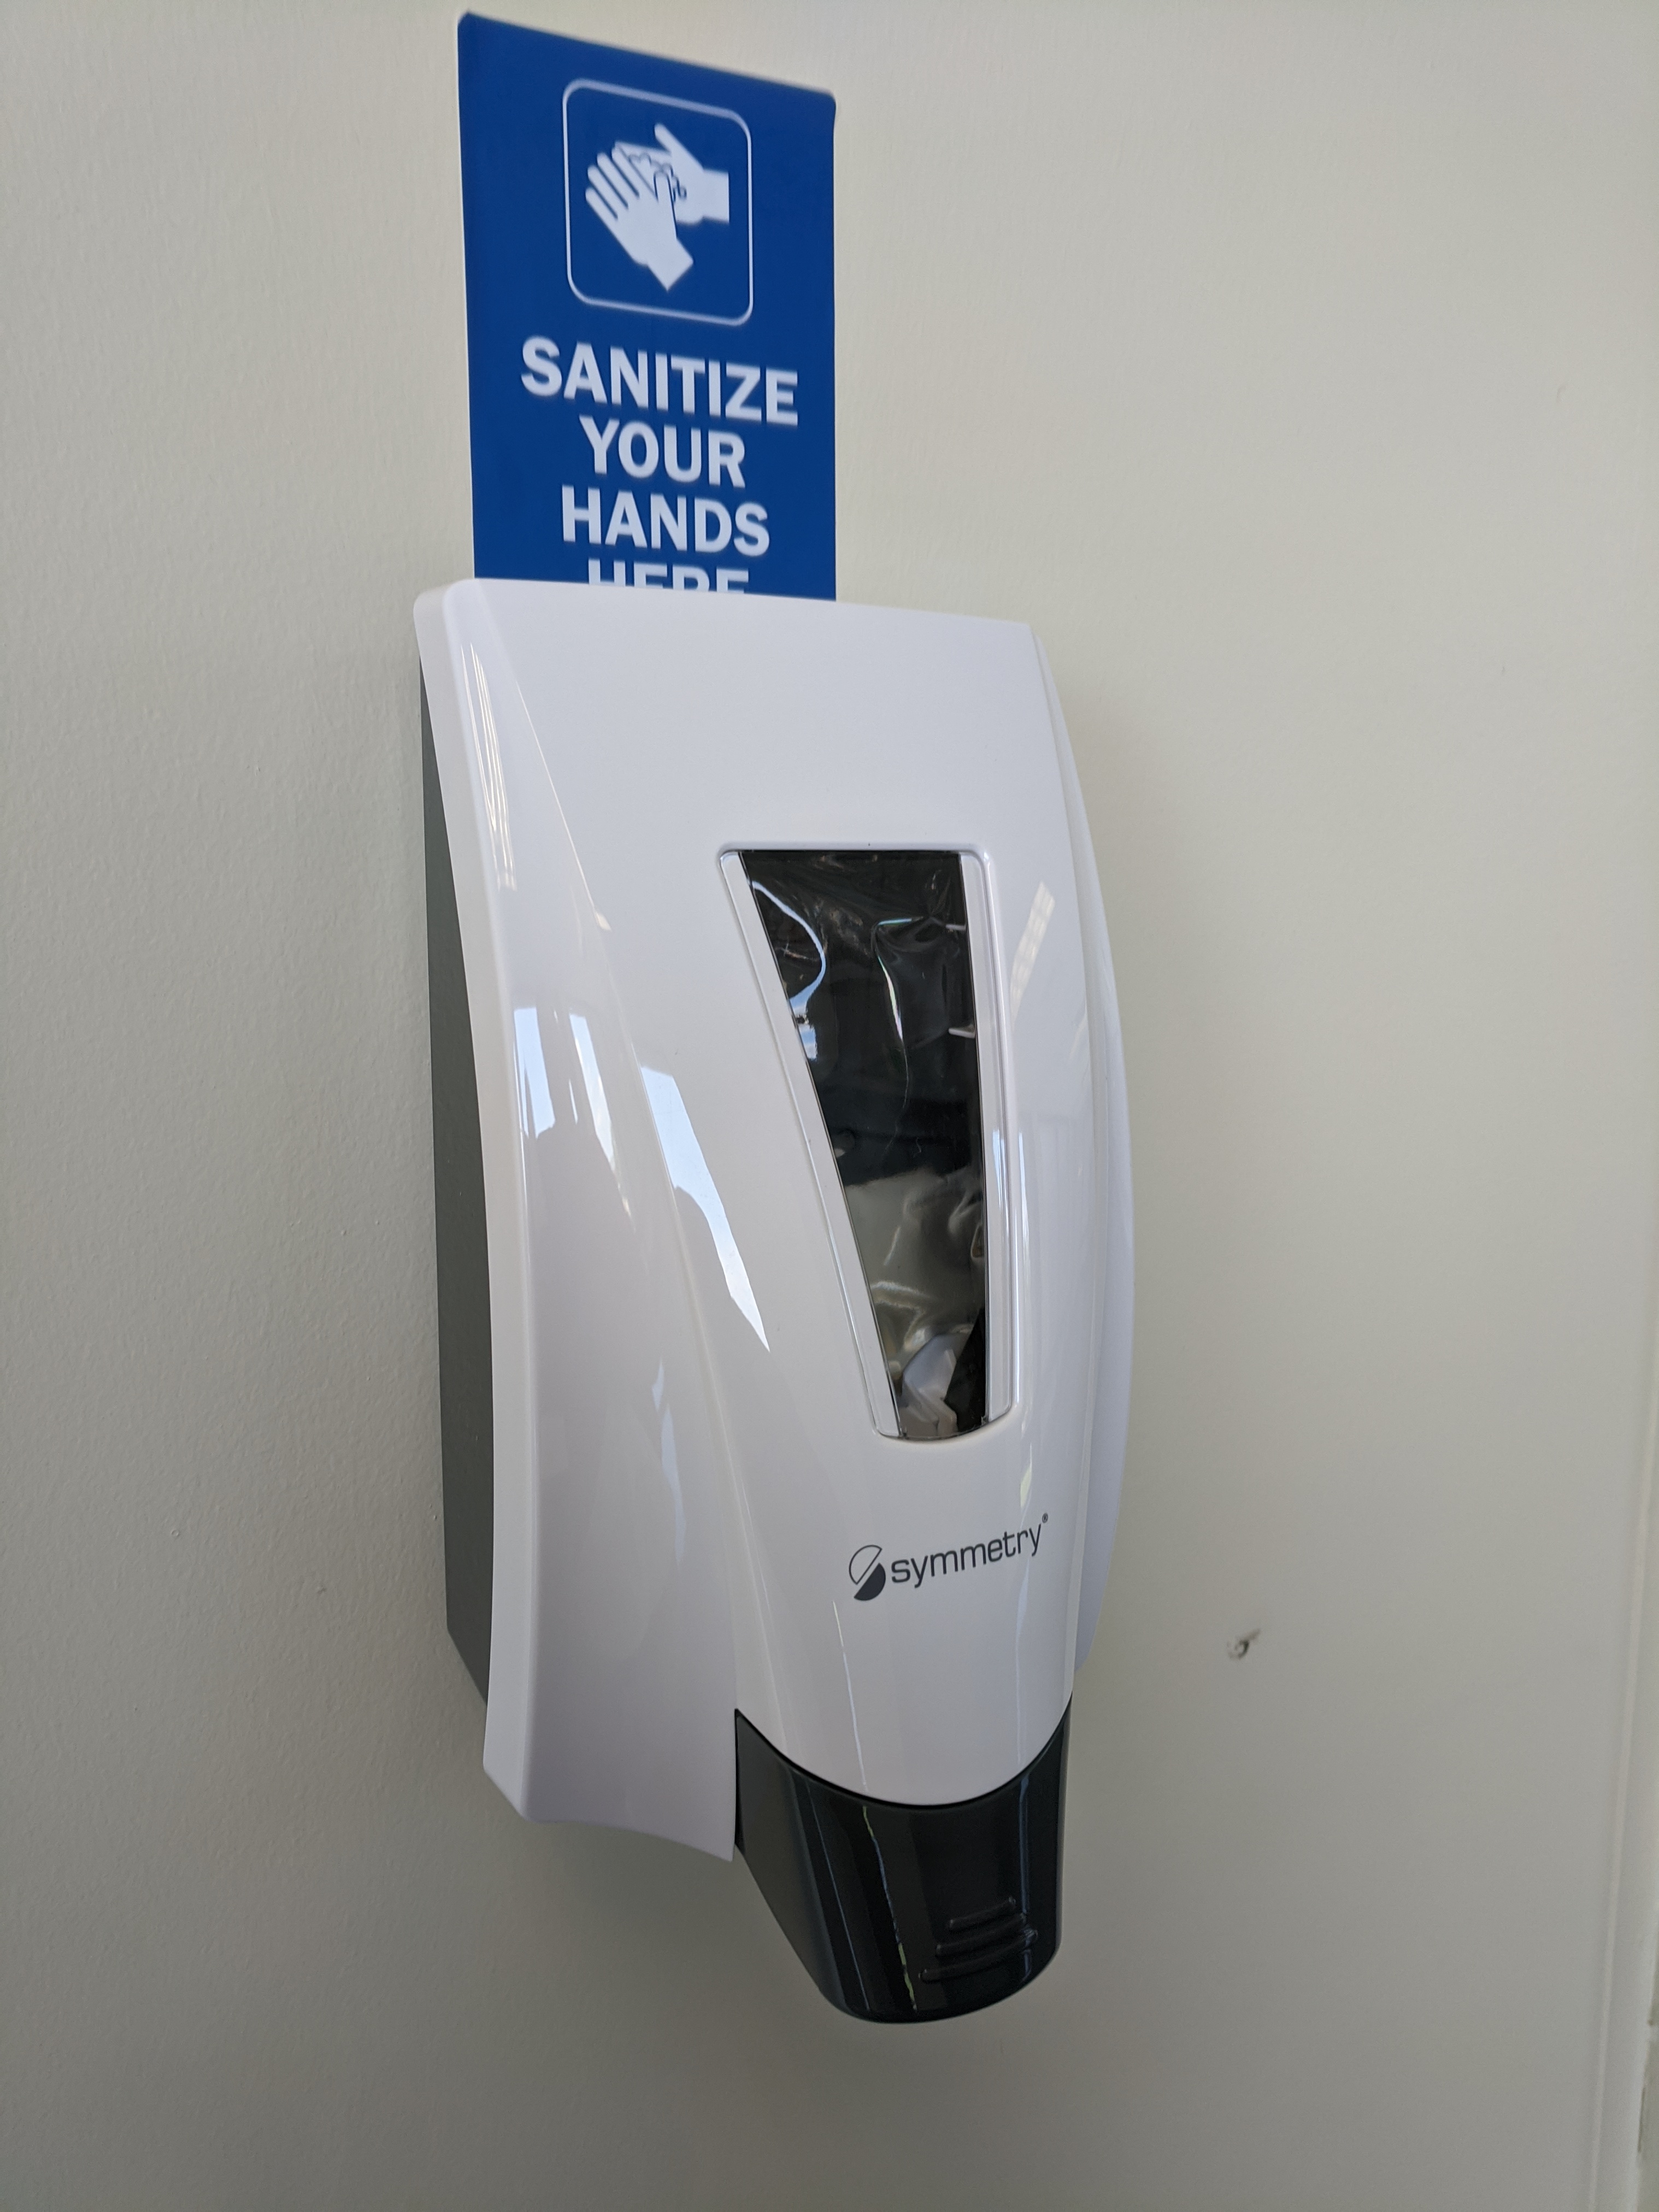 Wall mounted hand sanitizer station